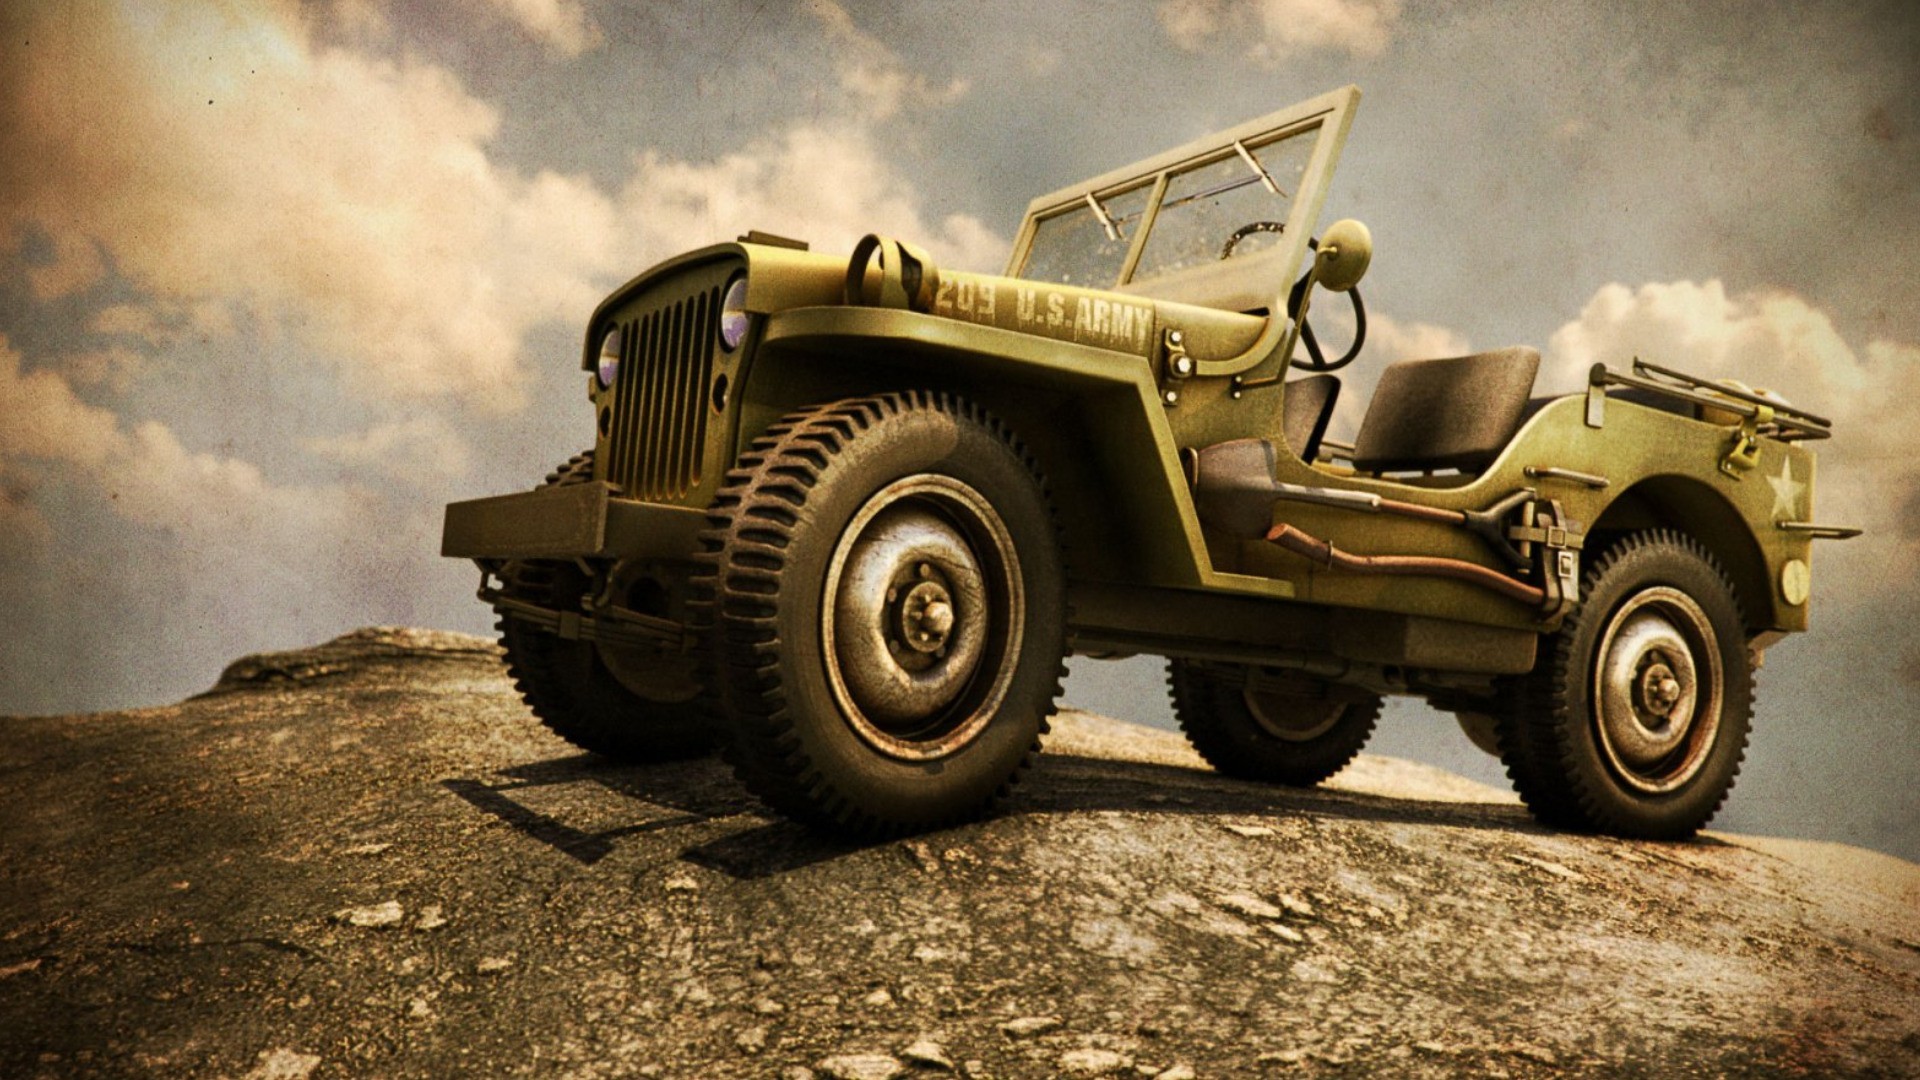 General 1920x1080 car vehicle Jeep United States Army military vehicle military artwork American cars